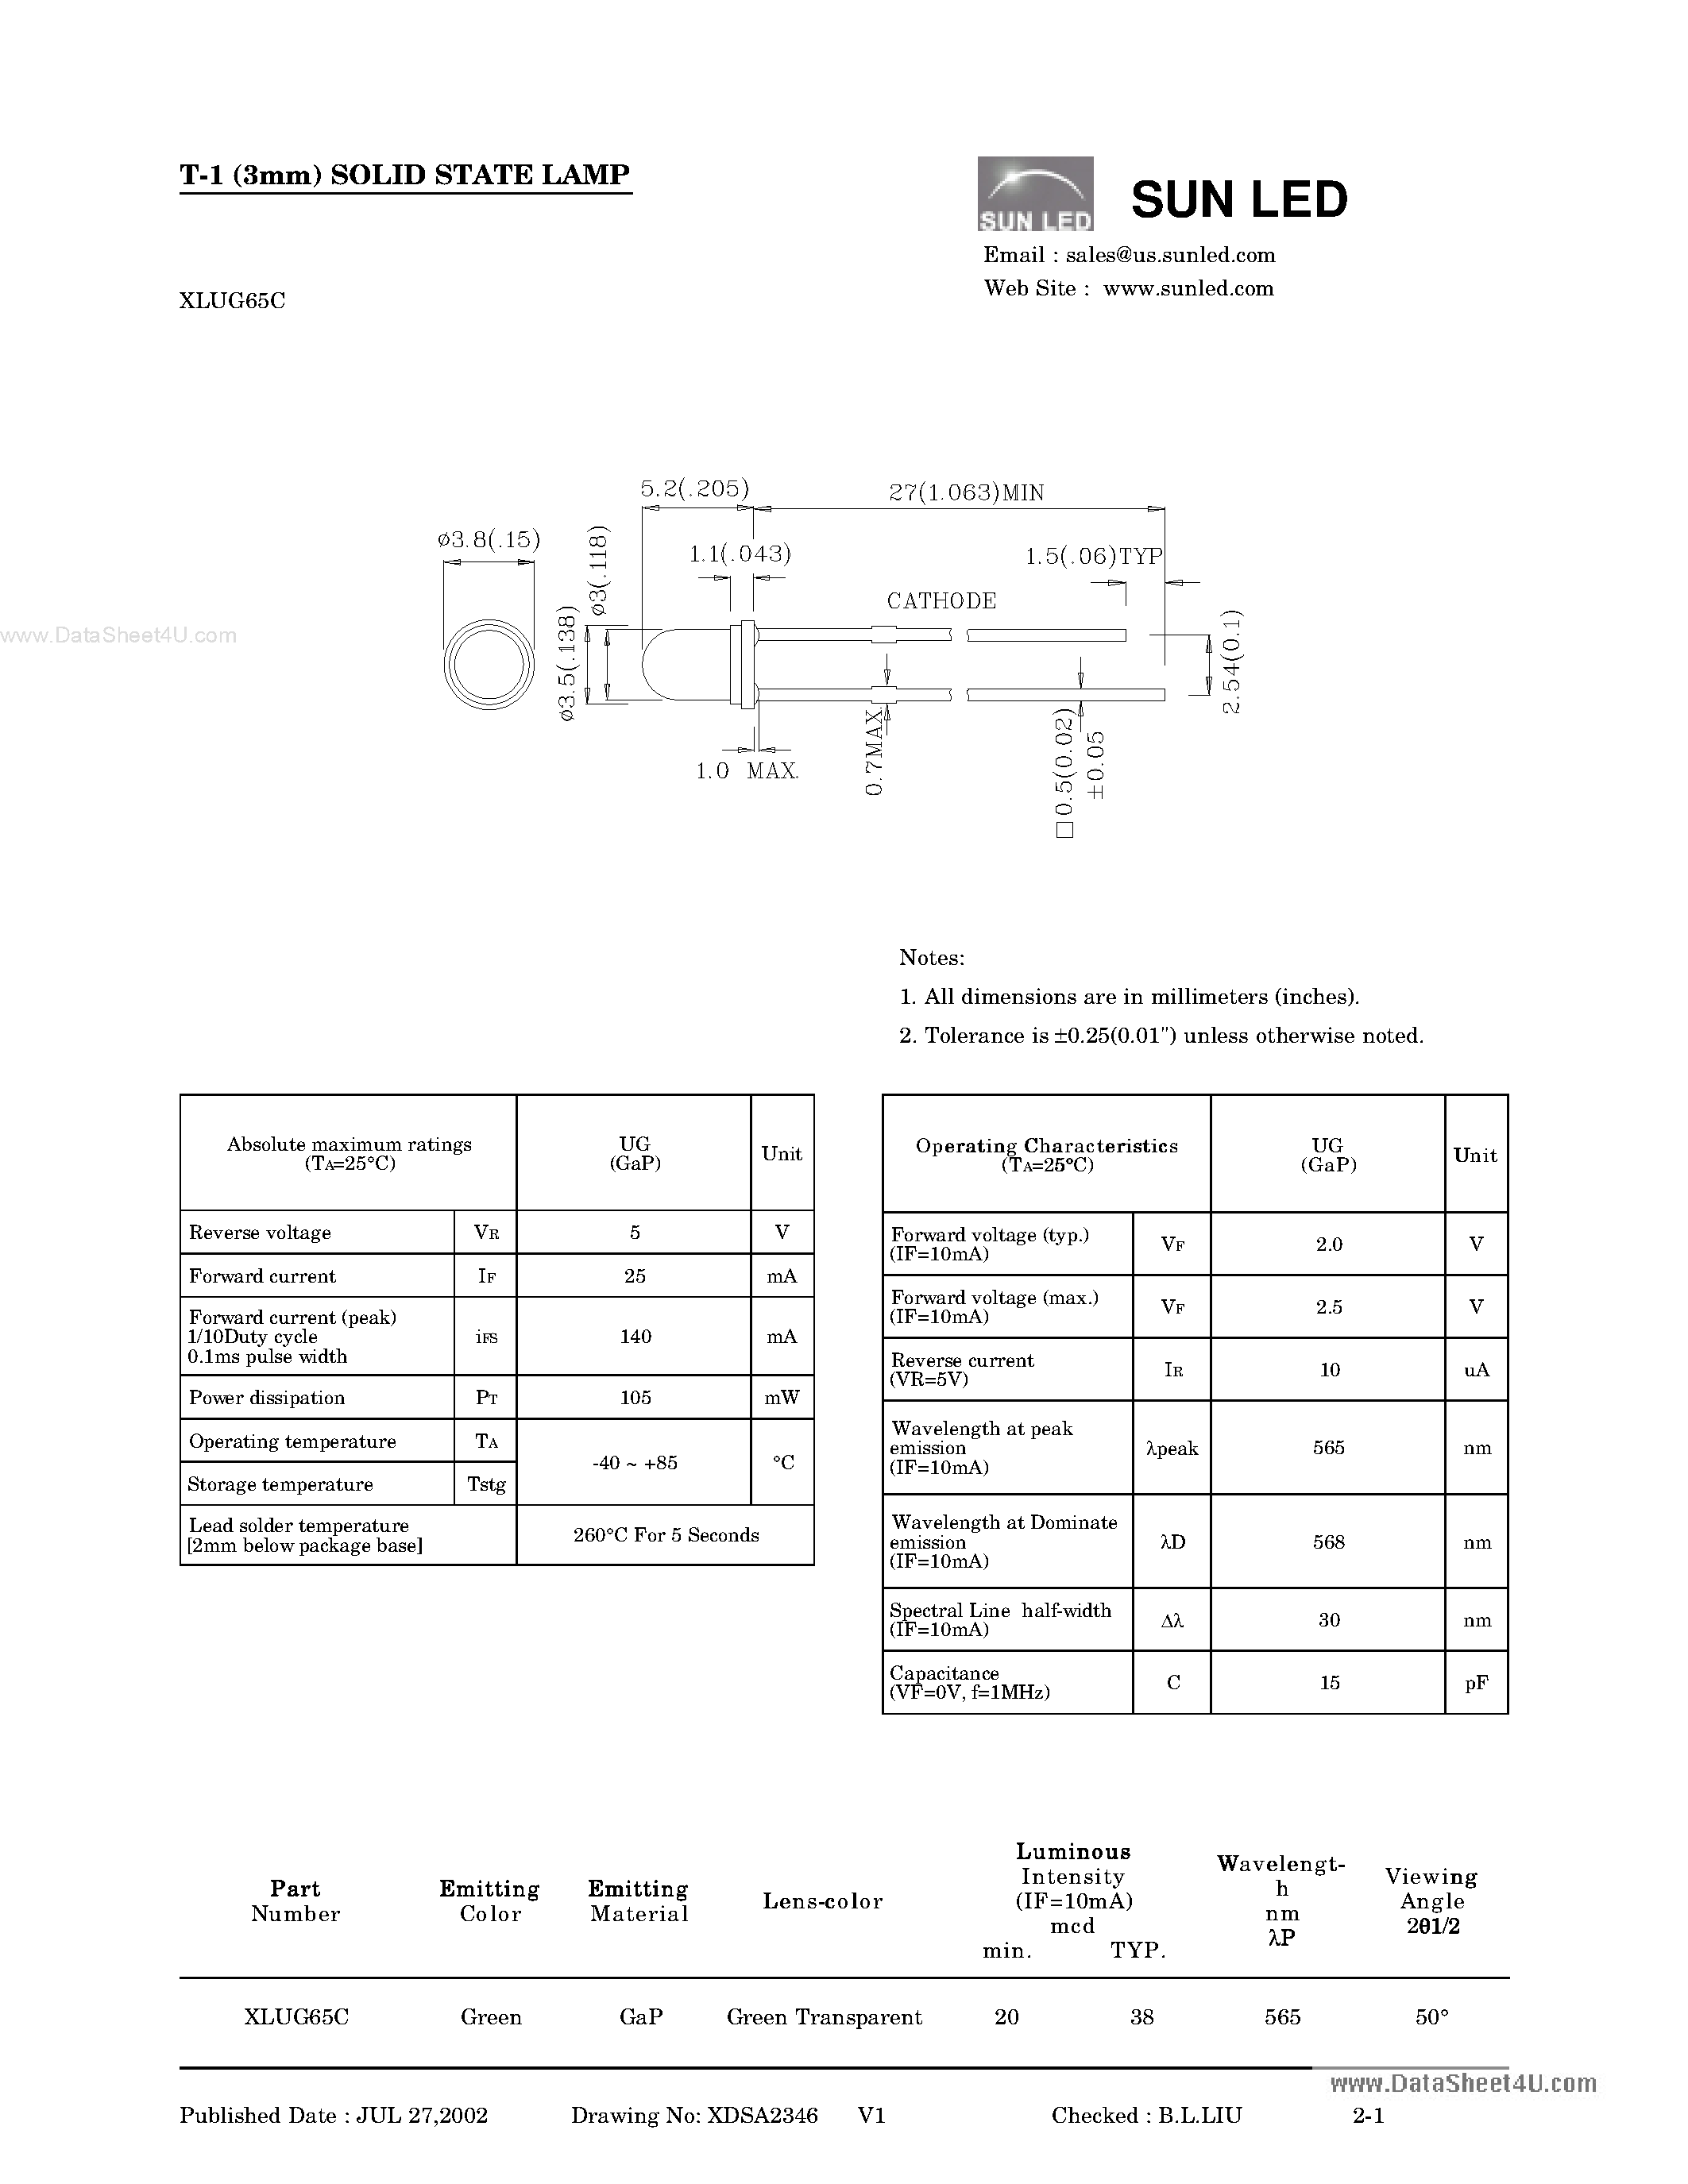 Datasheet XLUG65C - T-1 (3mm) SOLID STATE LAMP page 1